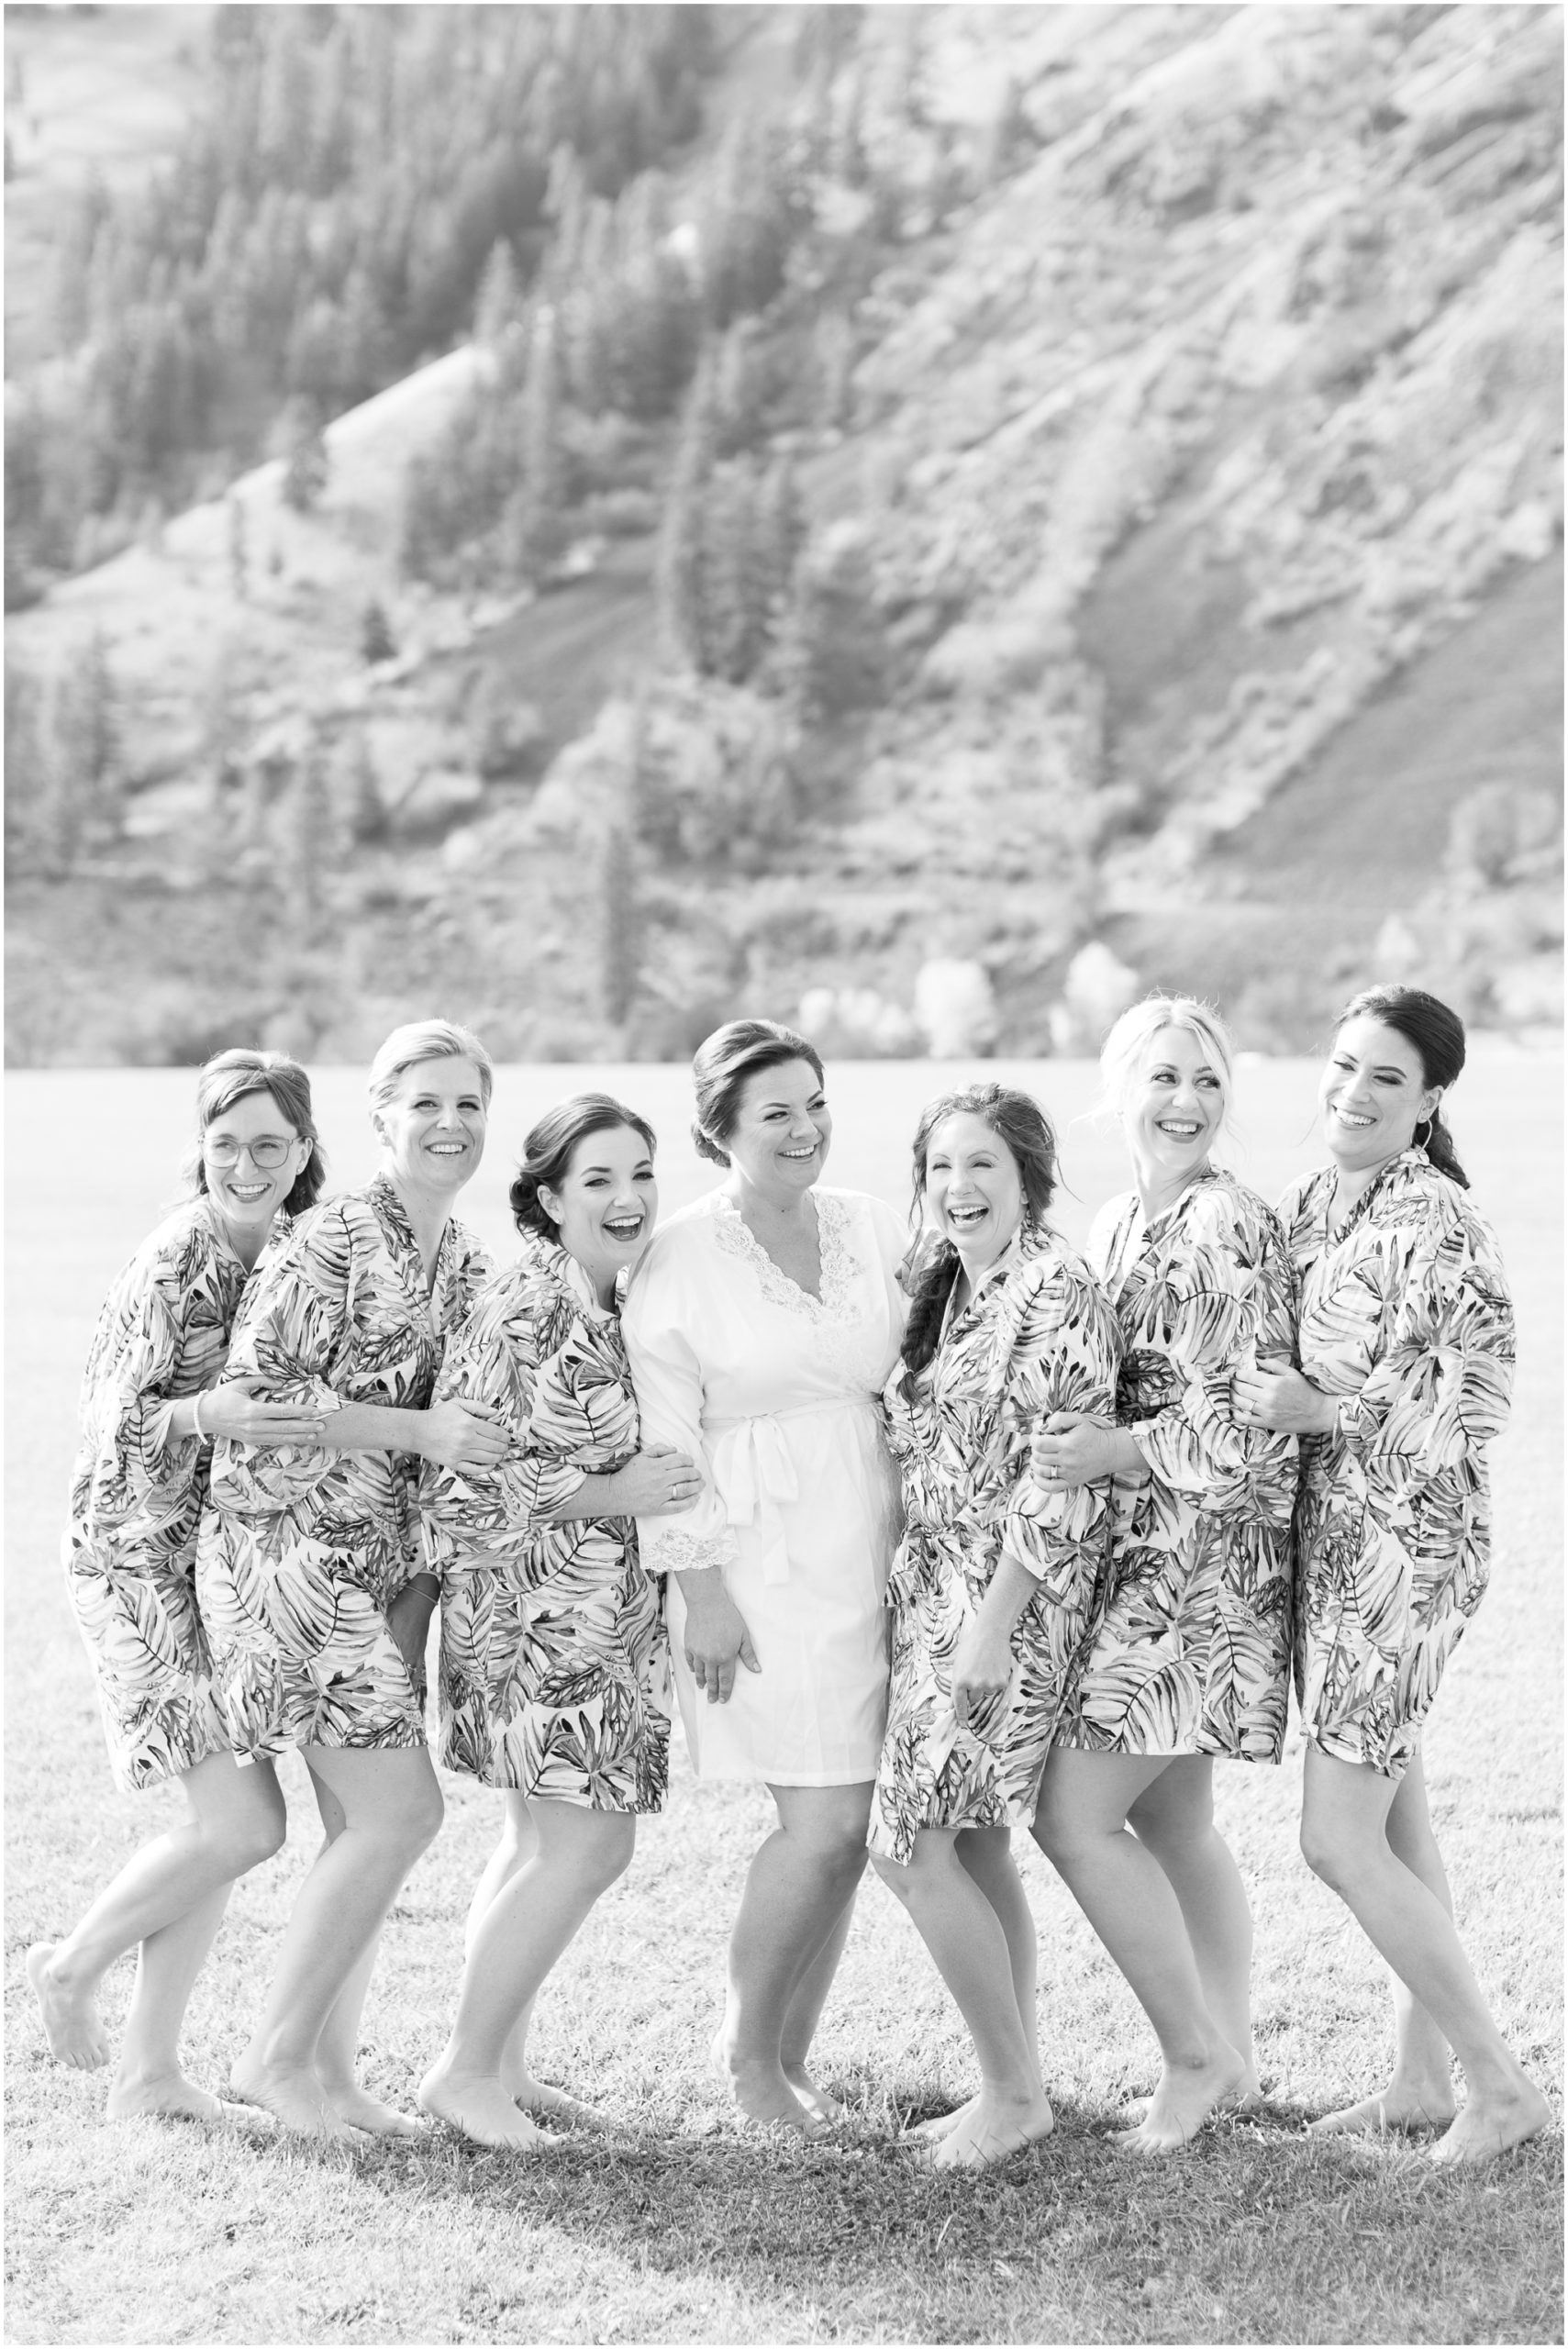 This American Homestead wedding was a Yakima wedding captured by Spokane wedding photographer Taylor Rose Photography at one of the best Yakima wedding venues, the American Homestead. Taylor Rose Photography is a Northern Virginia Wedding photographer and DC wedding photographer capturing weddings, engagement sessions and anniversaries across the U.S. and beyond. Flower girl robes